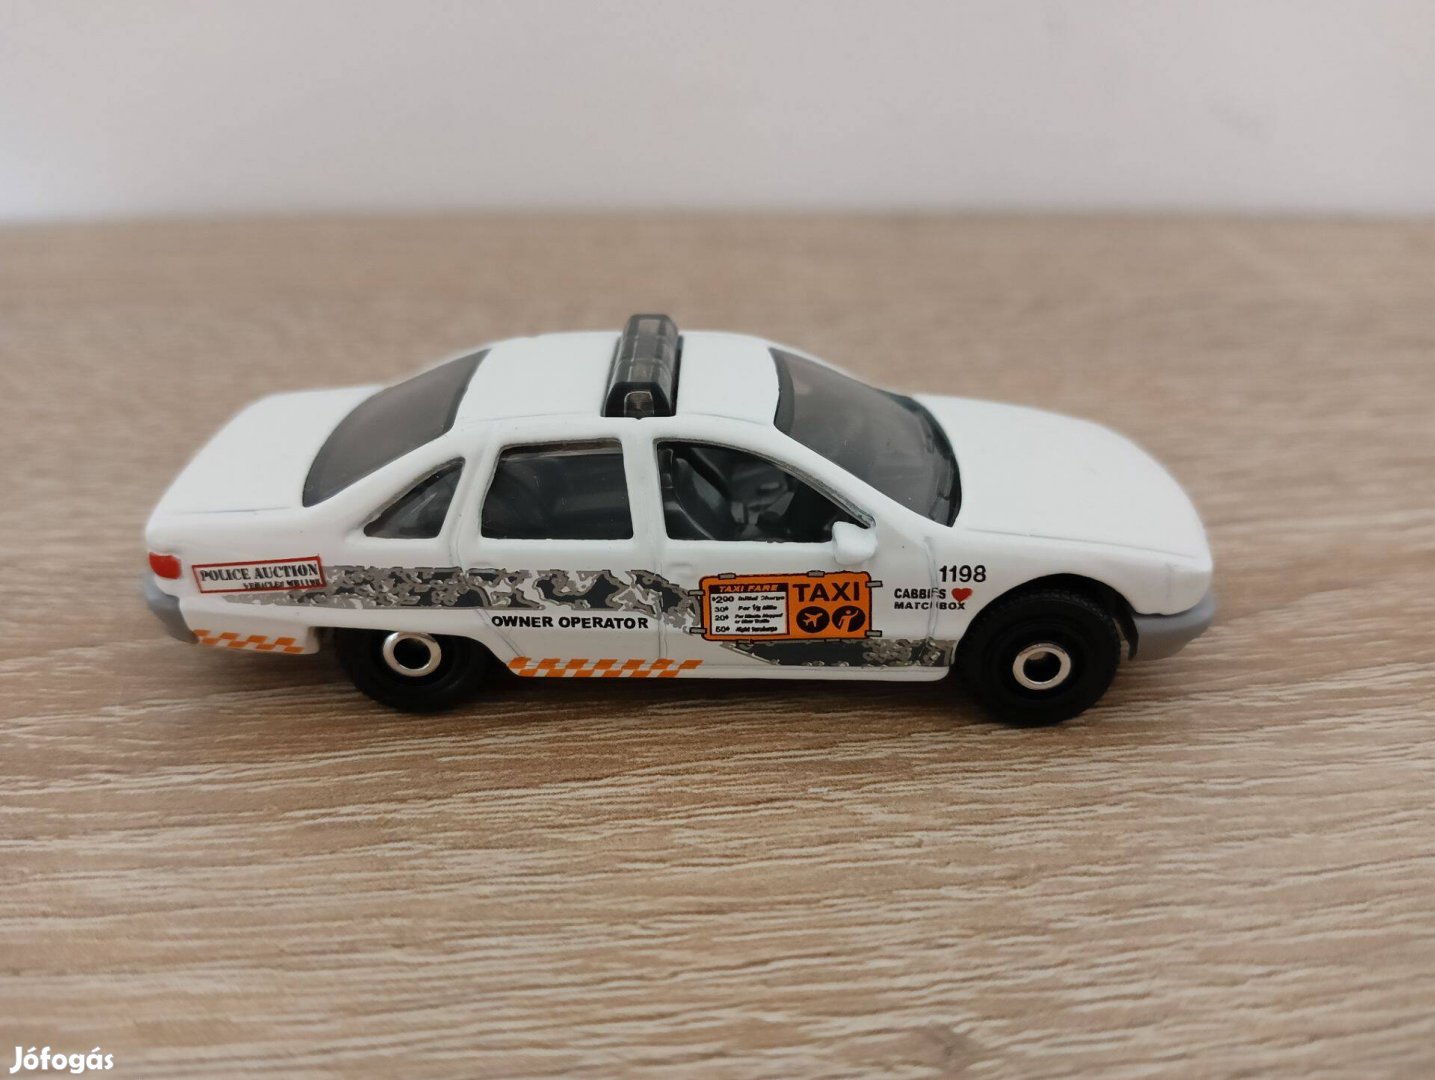 Matchbox '94 Chevy Caprice Police "Bosque Security" "Taxi"